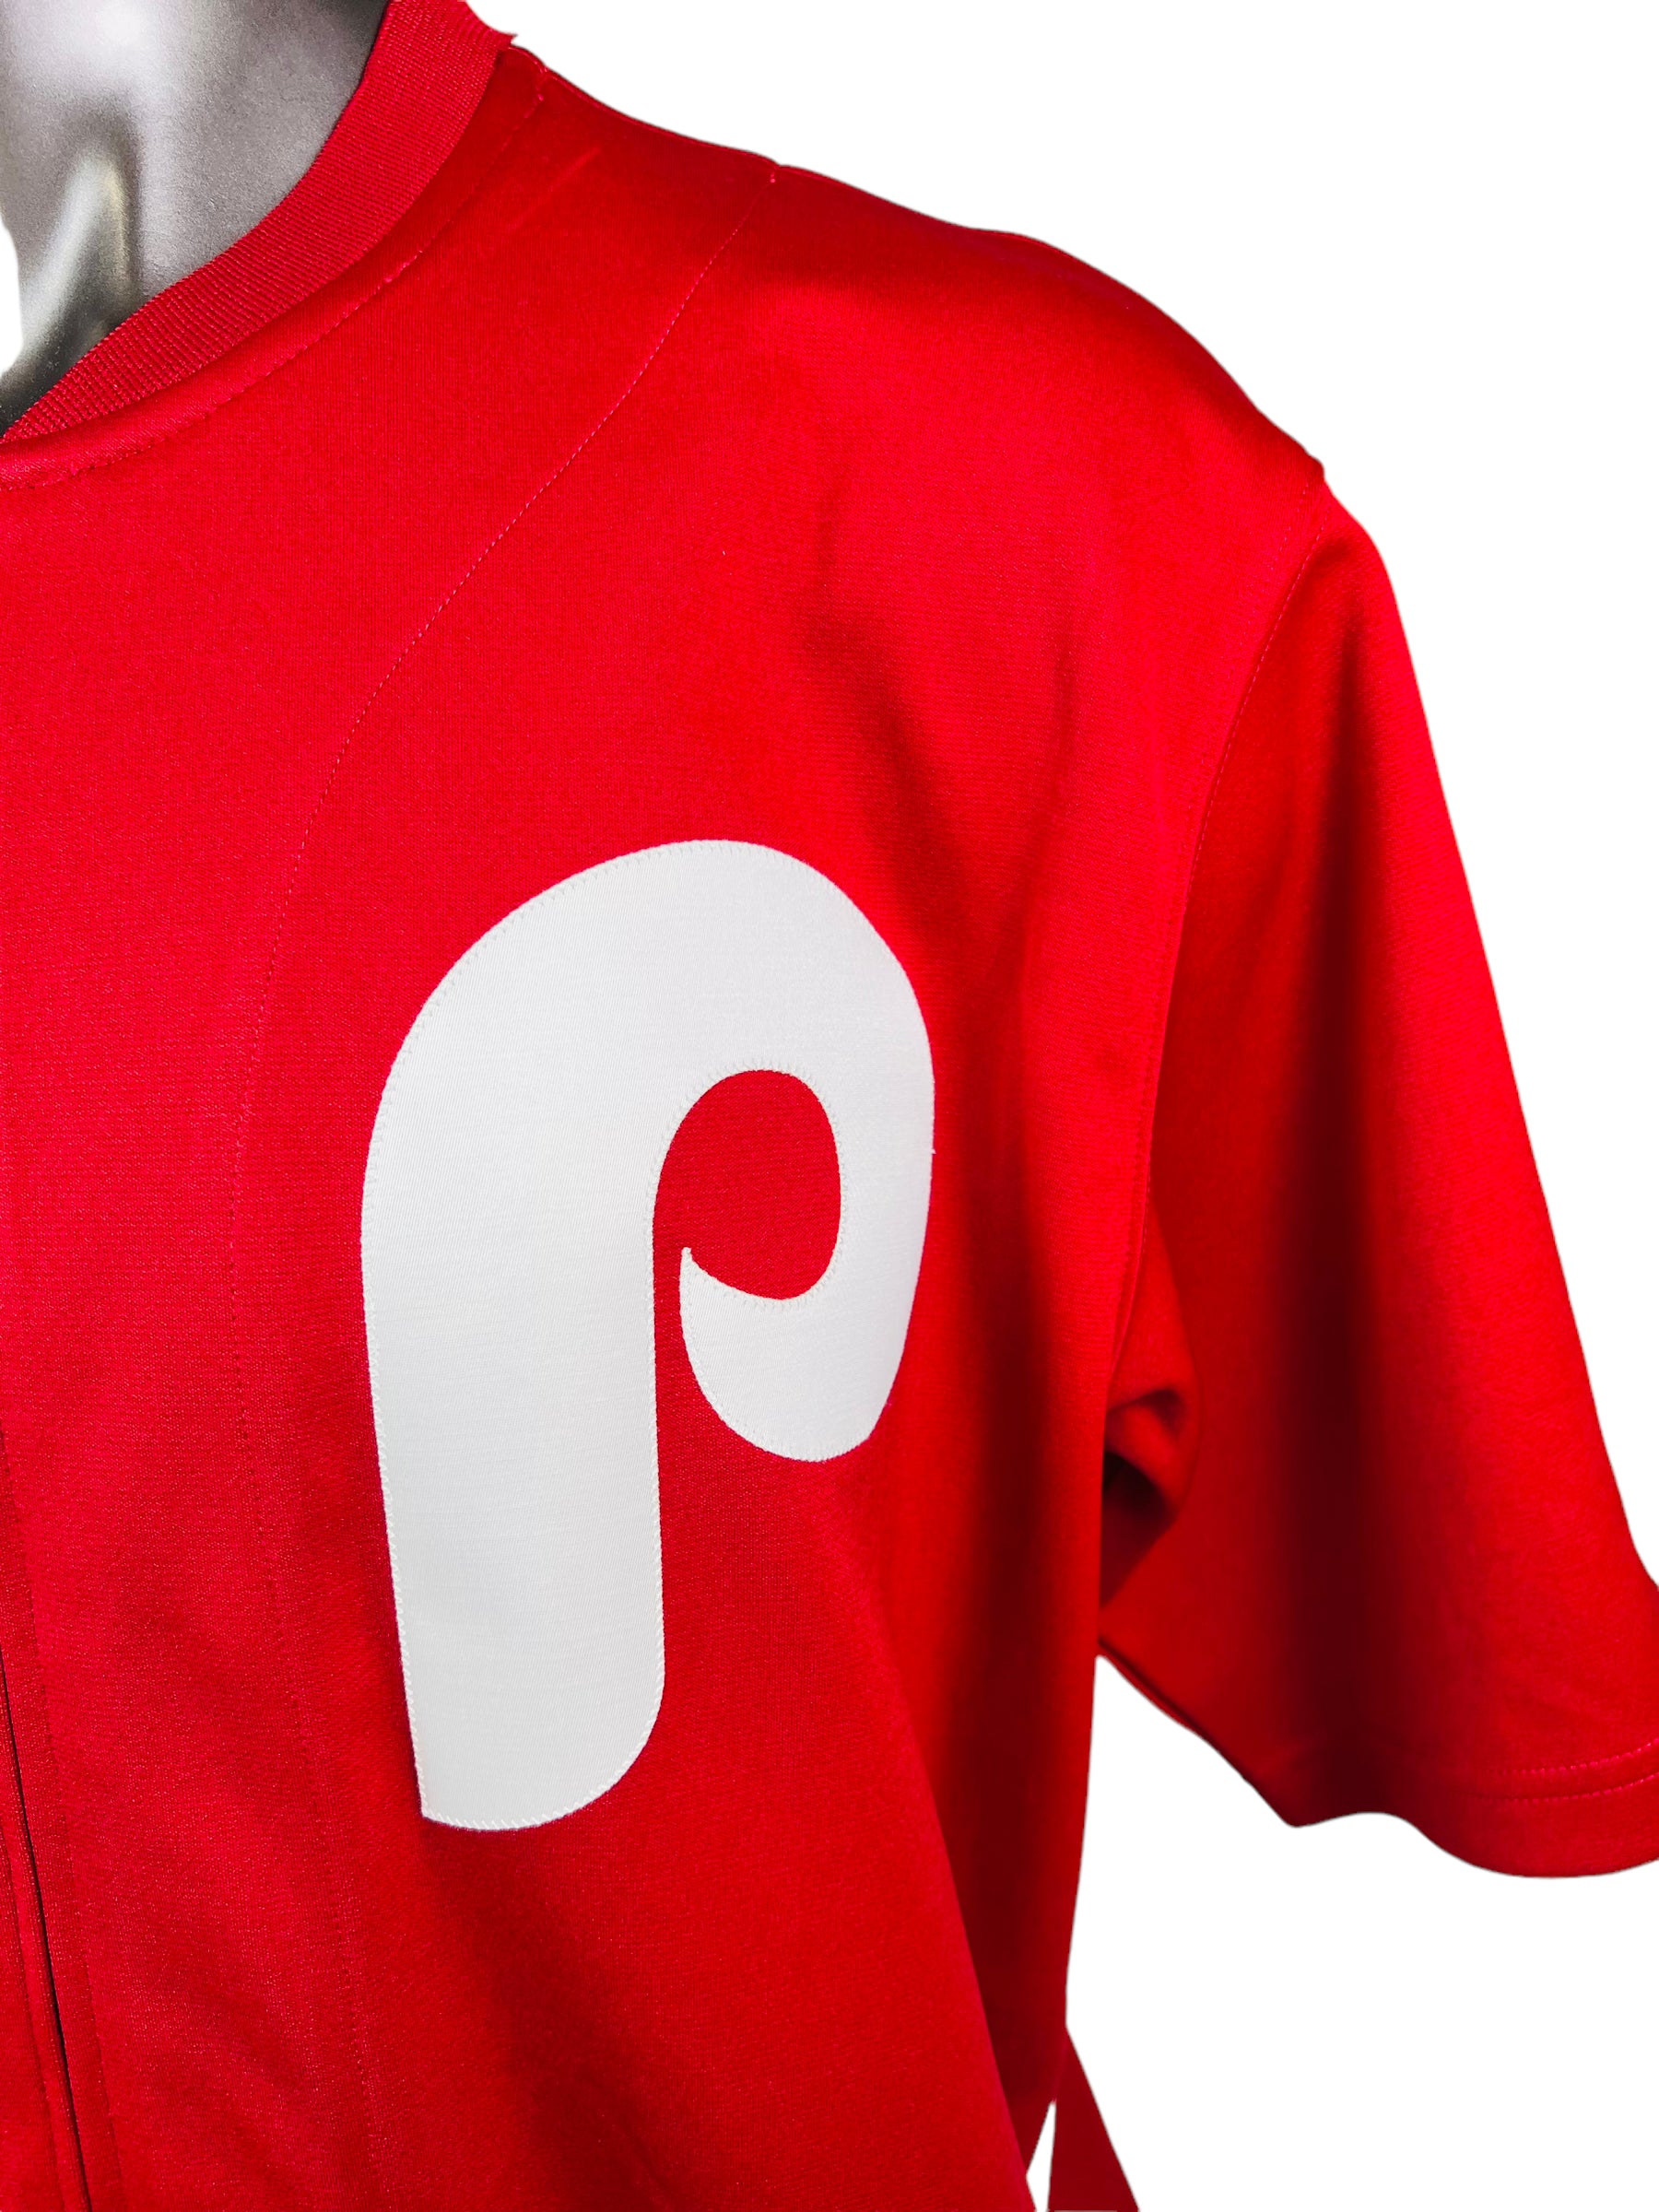 phillies mitchell and ness jersey